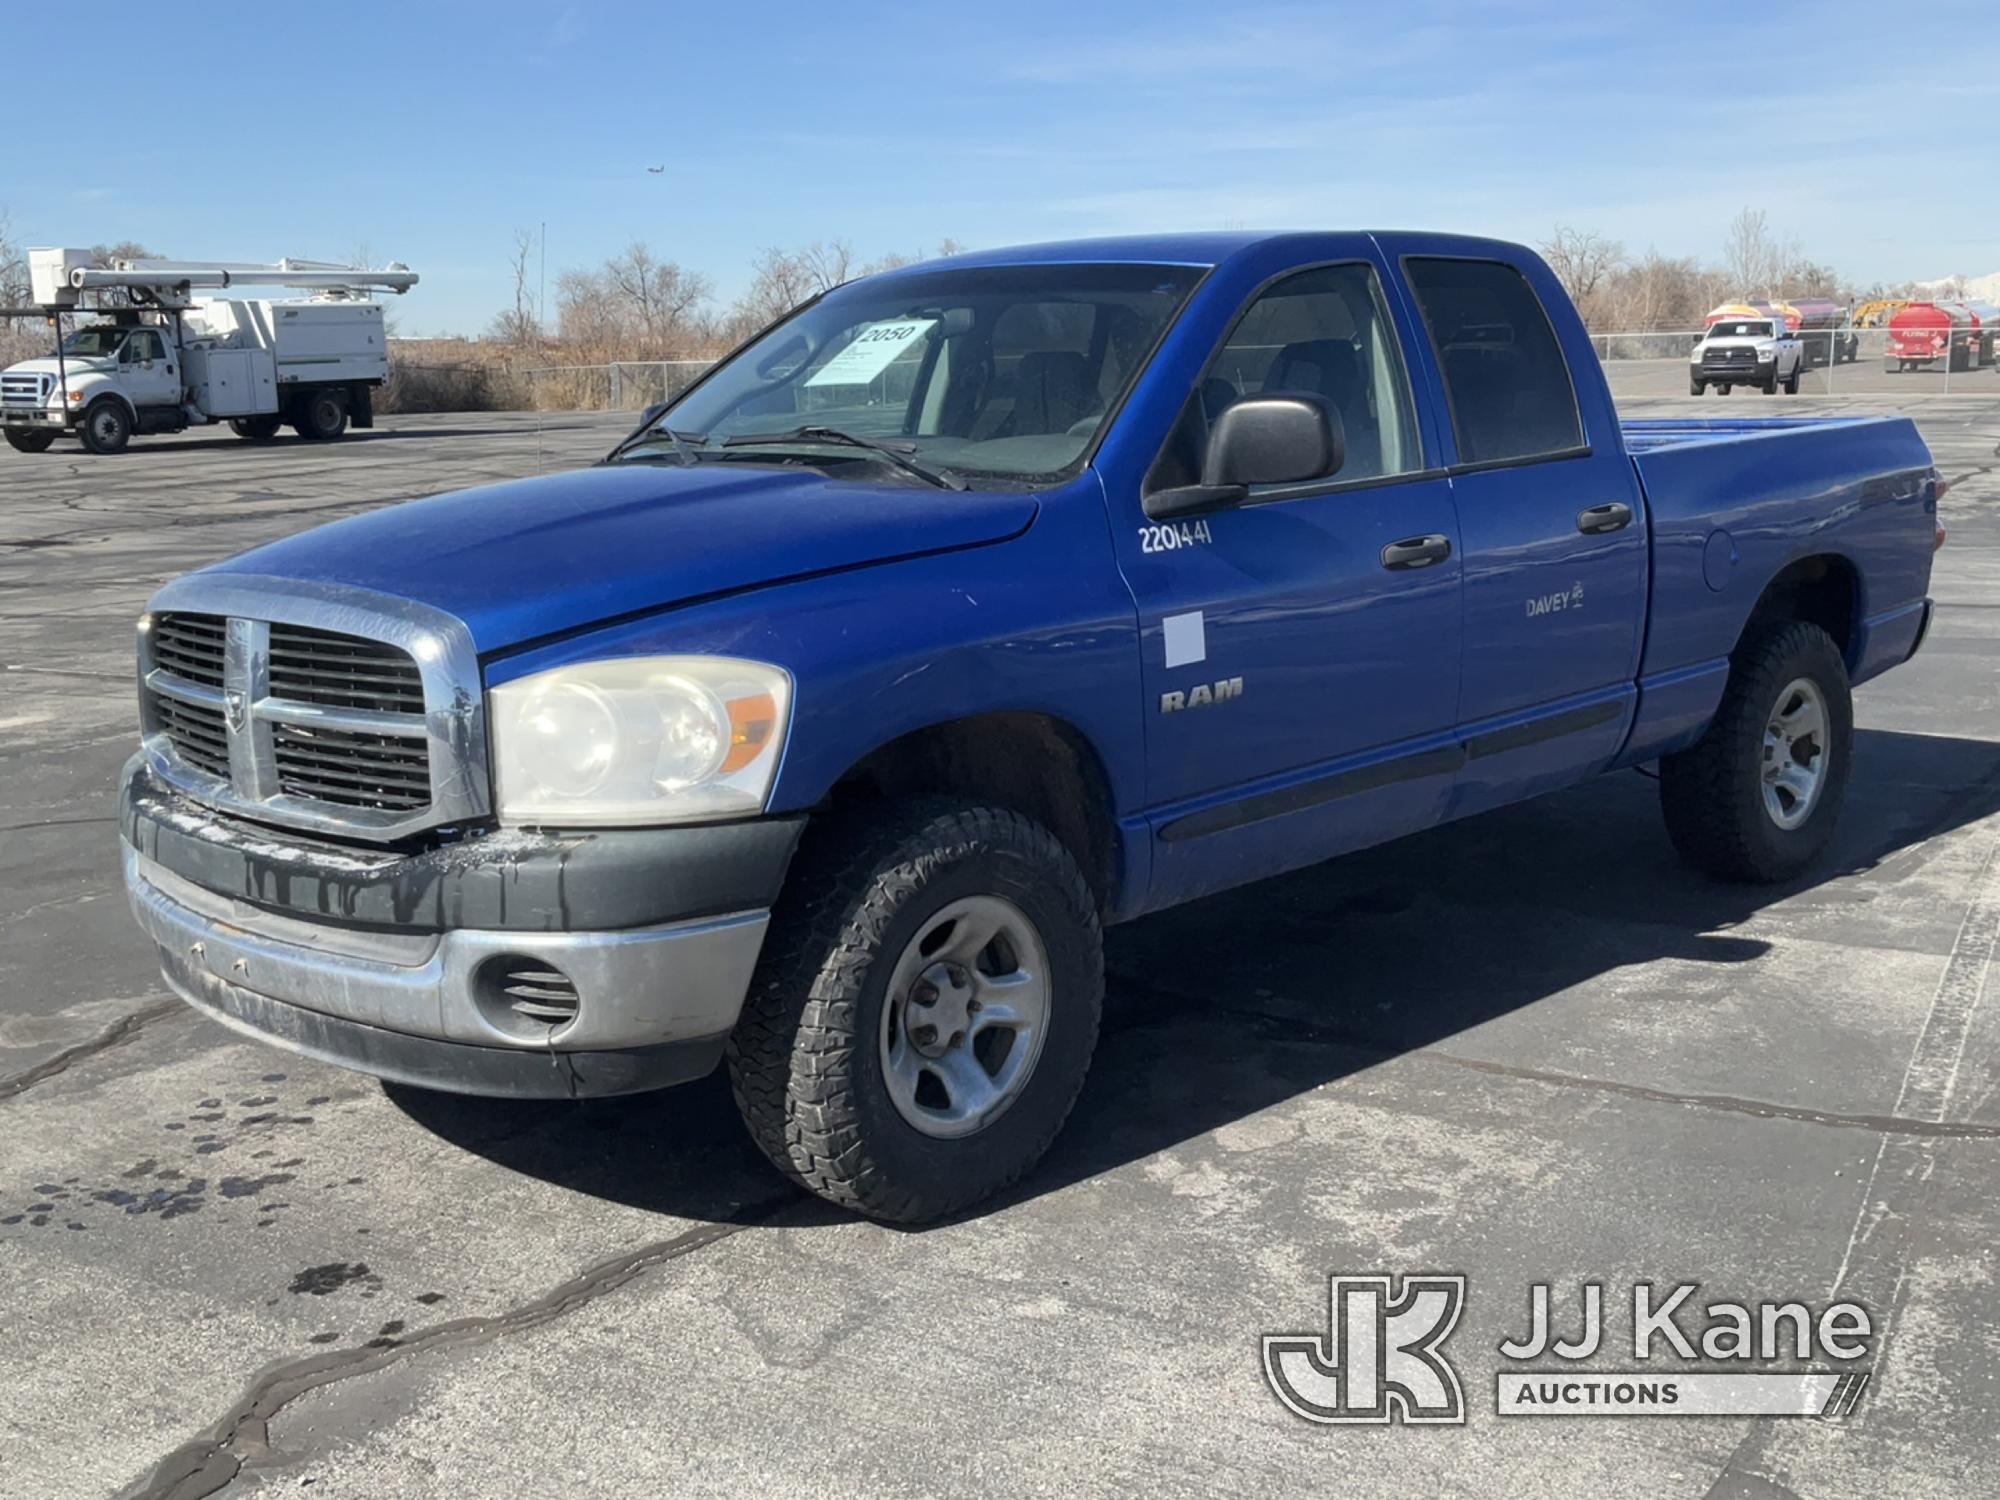 (Salt Lake City, UT) 2008 Dodge 1500 4x4 Crew-Cab Pickup Truck Drive Line Removed, Bad Ball Joints a